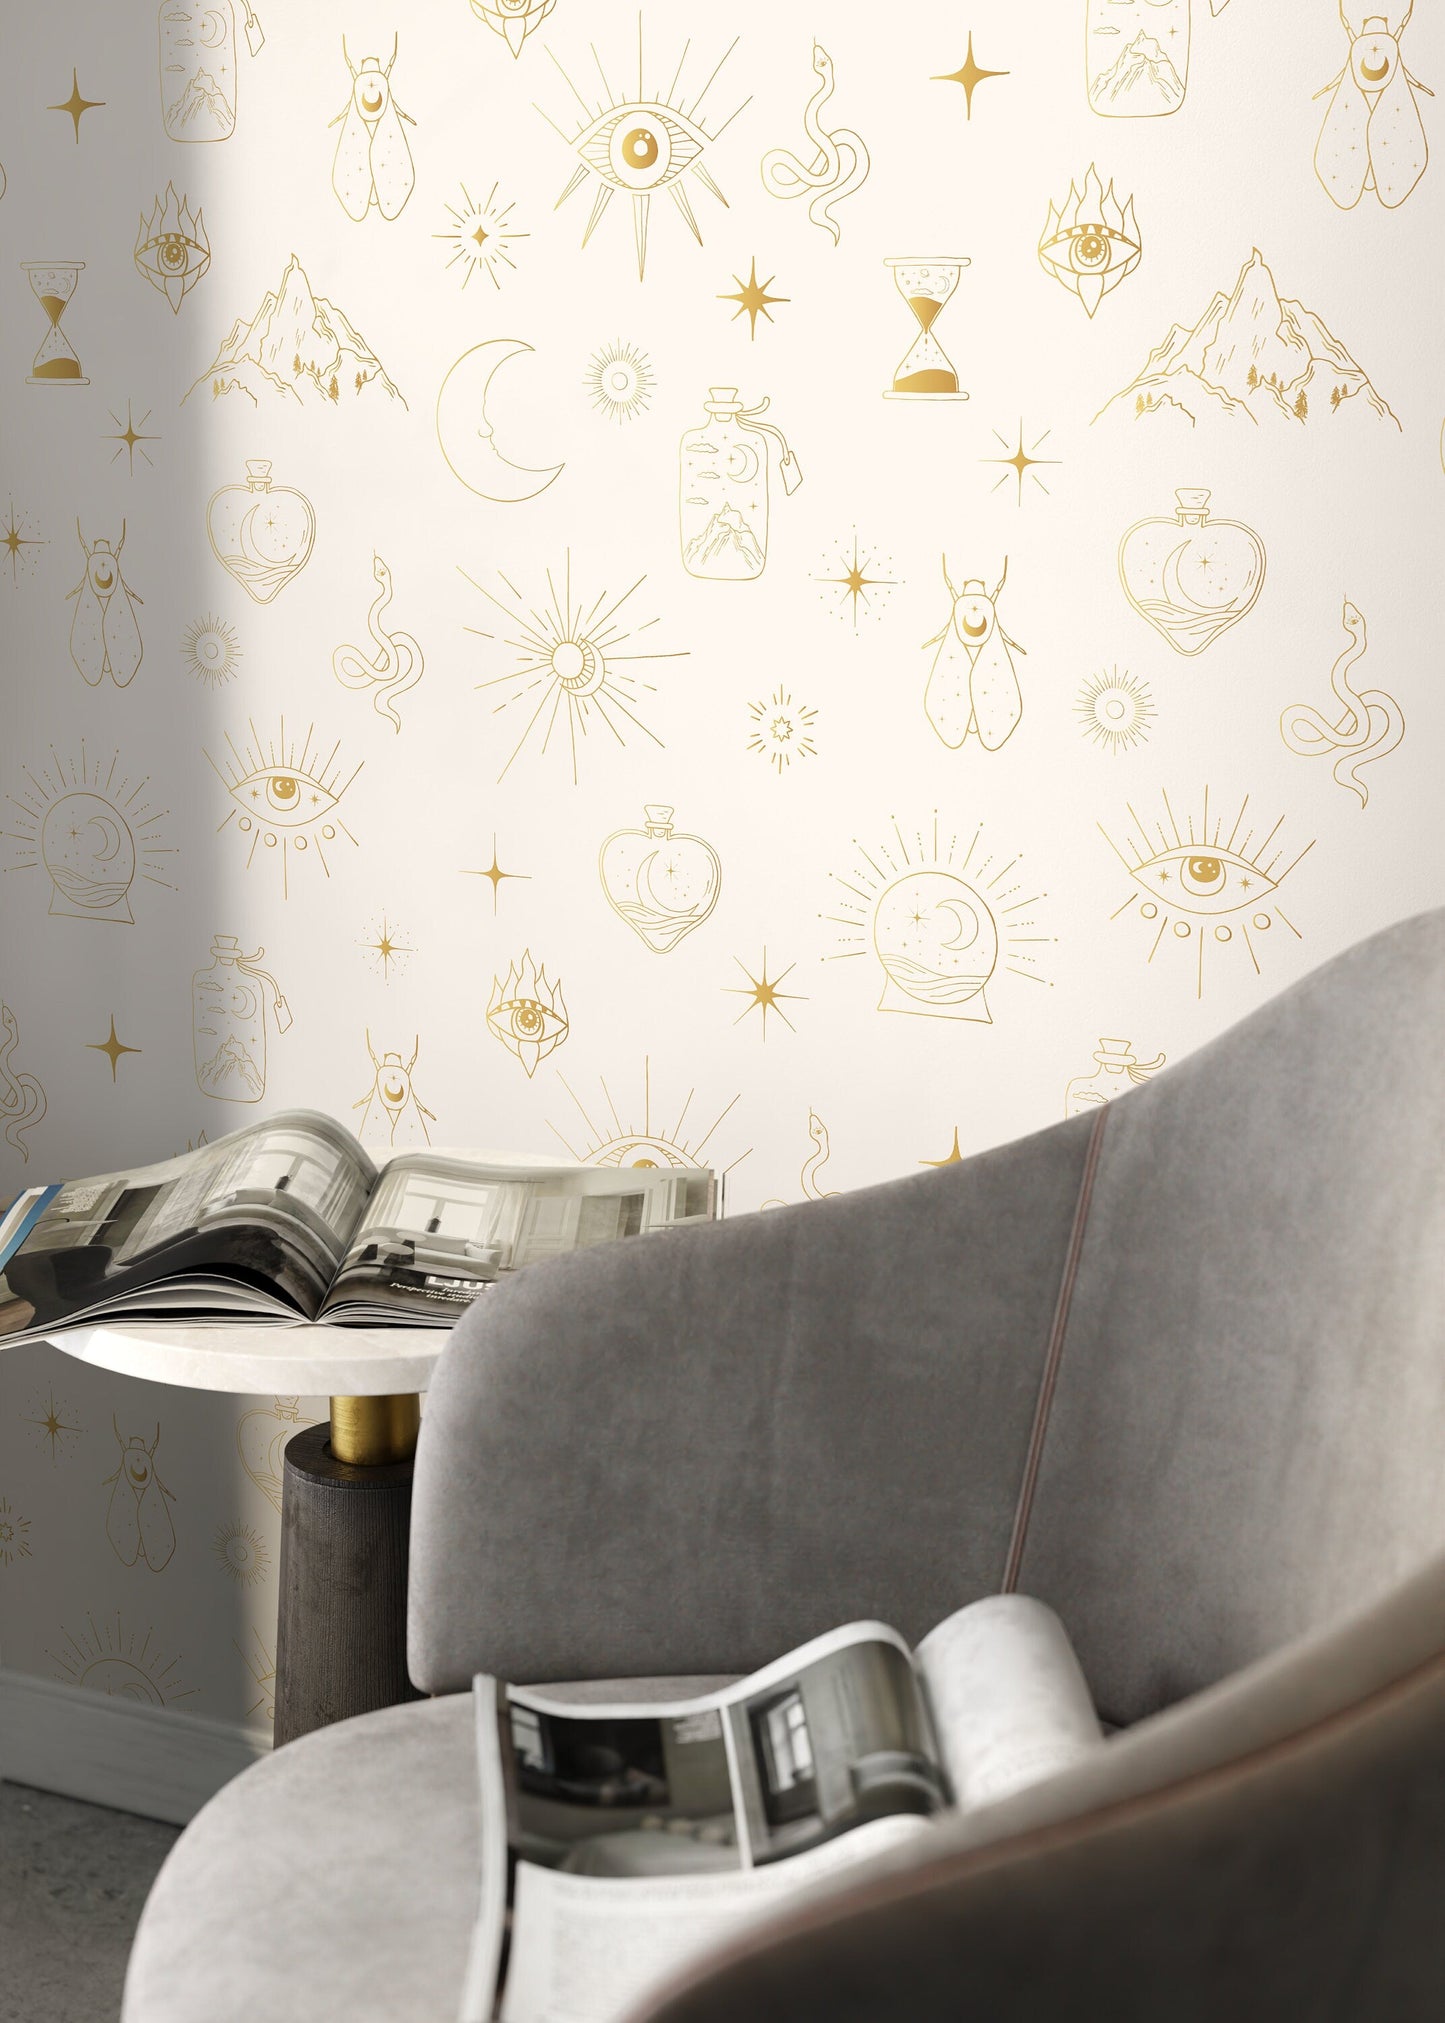 Mystique and Celestial Wallpaper Removable Peel and Stick Wallpaper Peel and Stick Wallpaper Moon and Butterfly - ZAAP